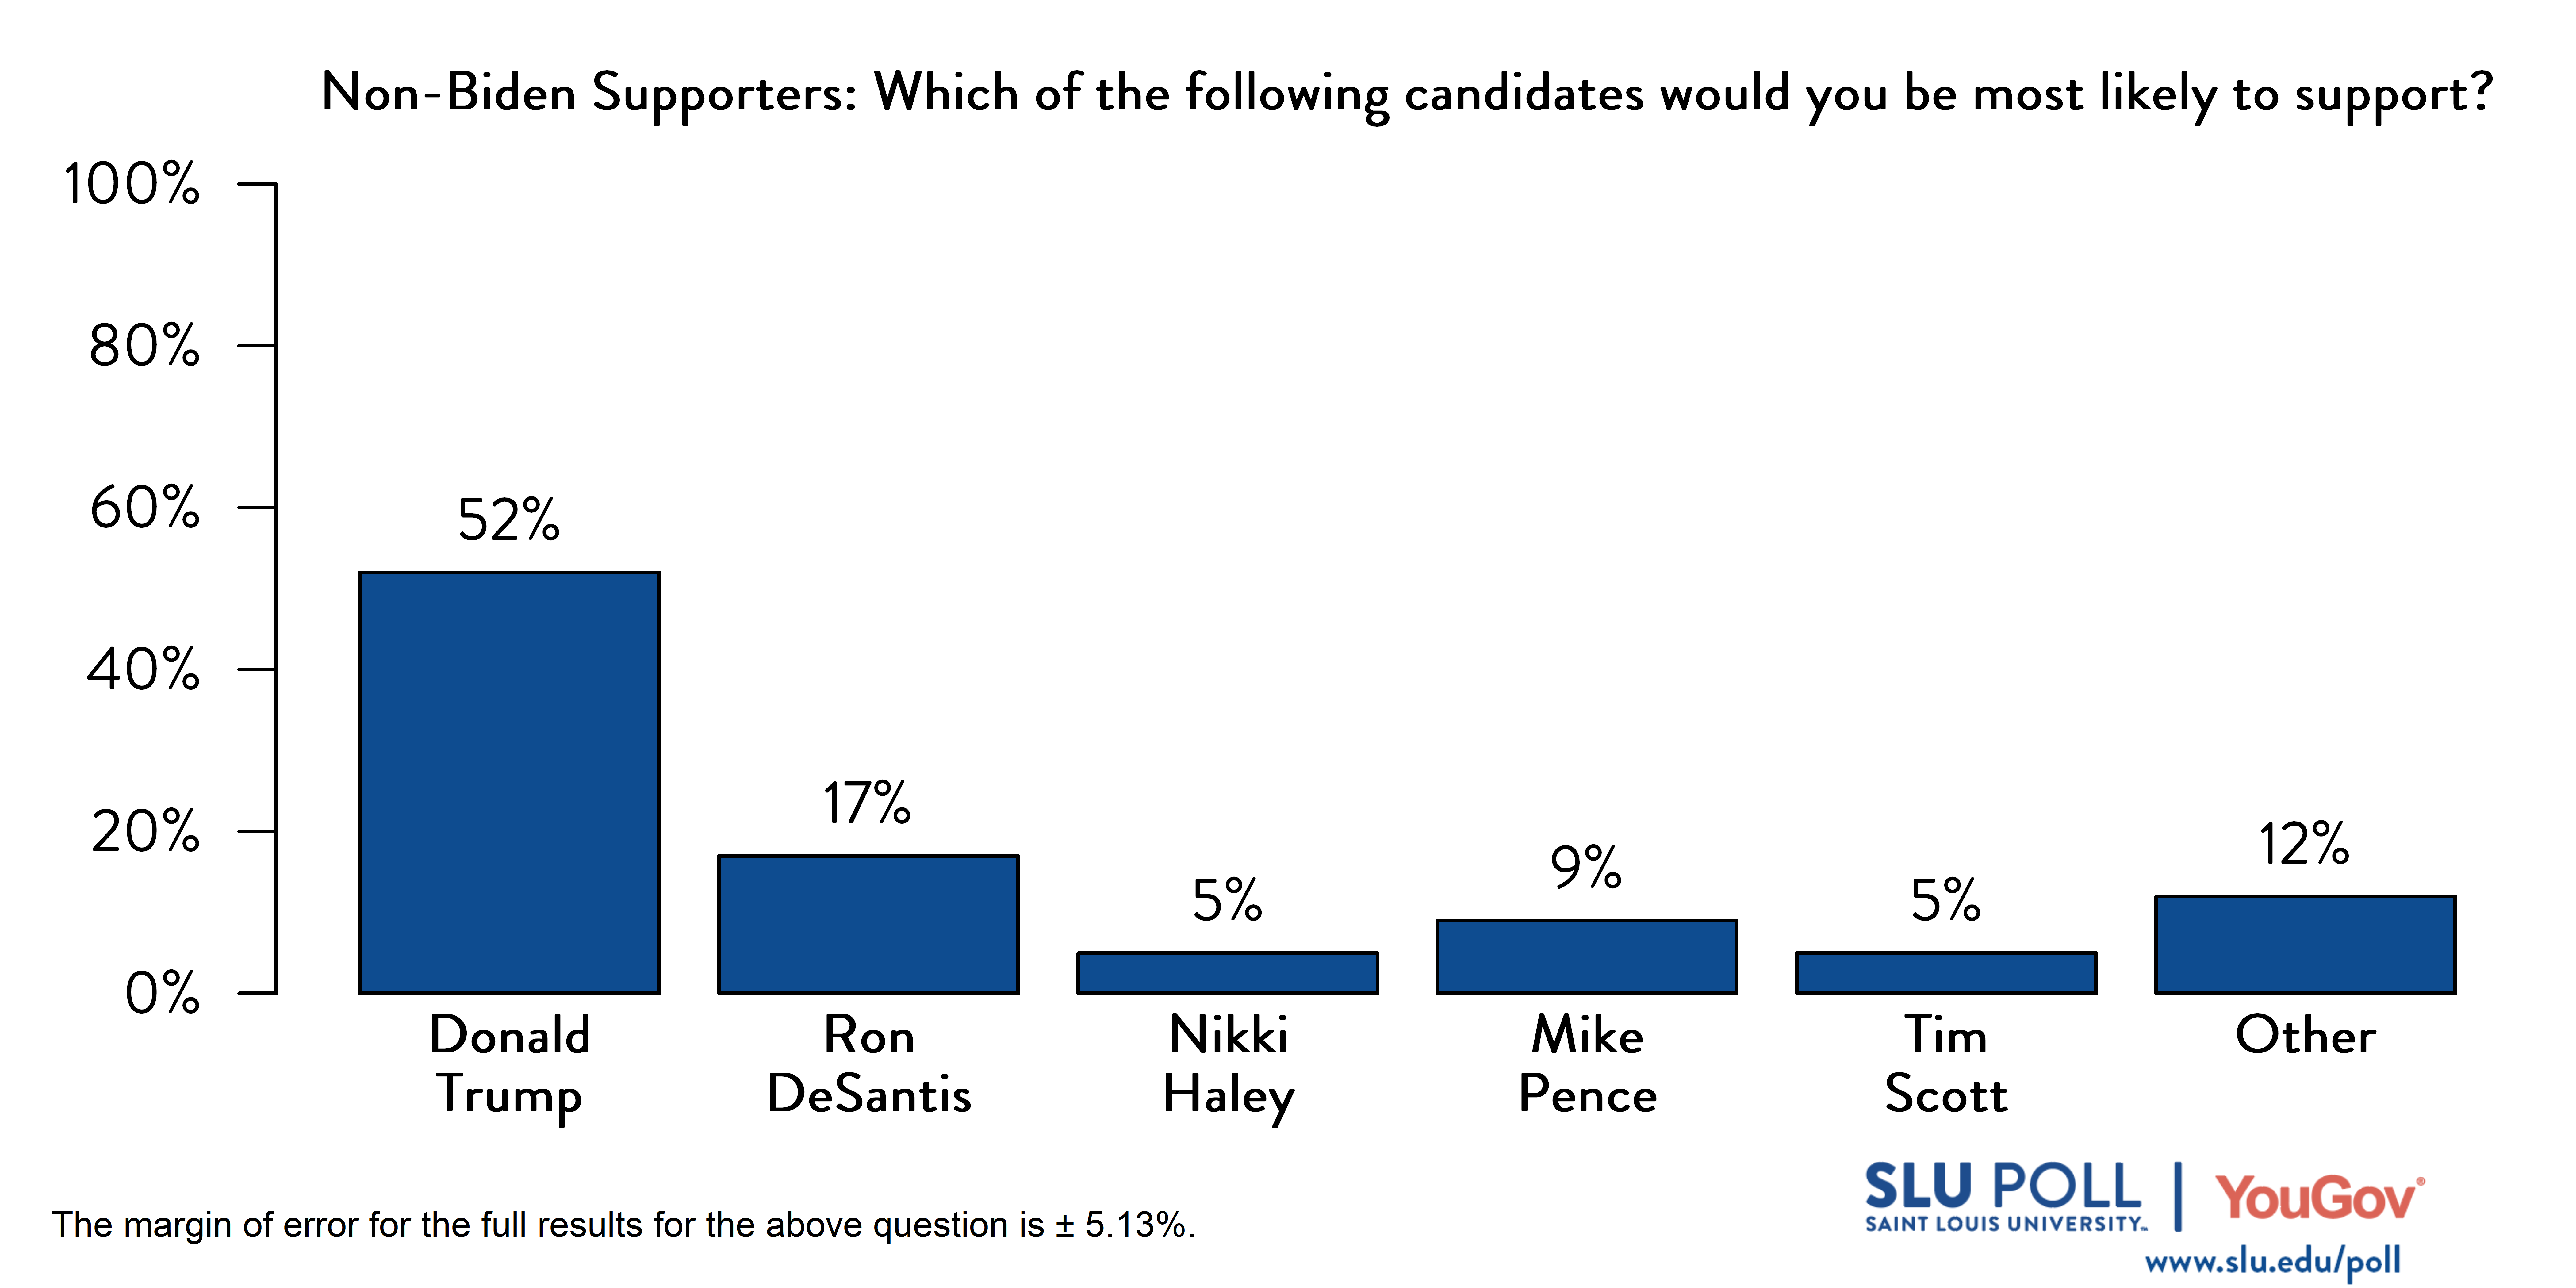 Likely voters' responses to 'Which of the following candidates would you be most likely to support?': 52% Donald Trump, 17% Ron DeSantis, 5% Nikki Haley, 9% Mike Pence, 5% Tim Scott, and 12% Other.